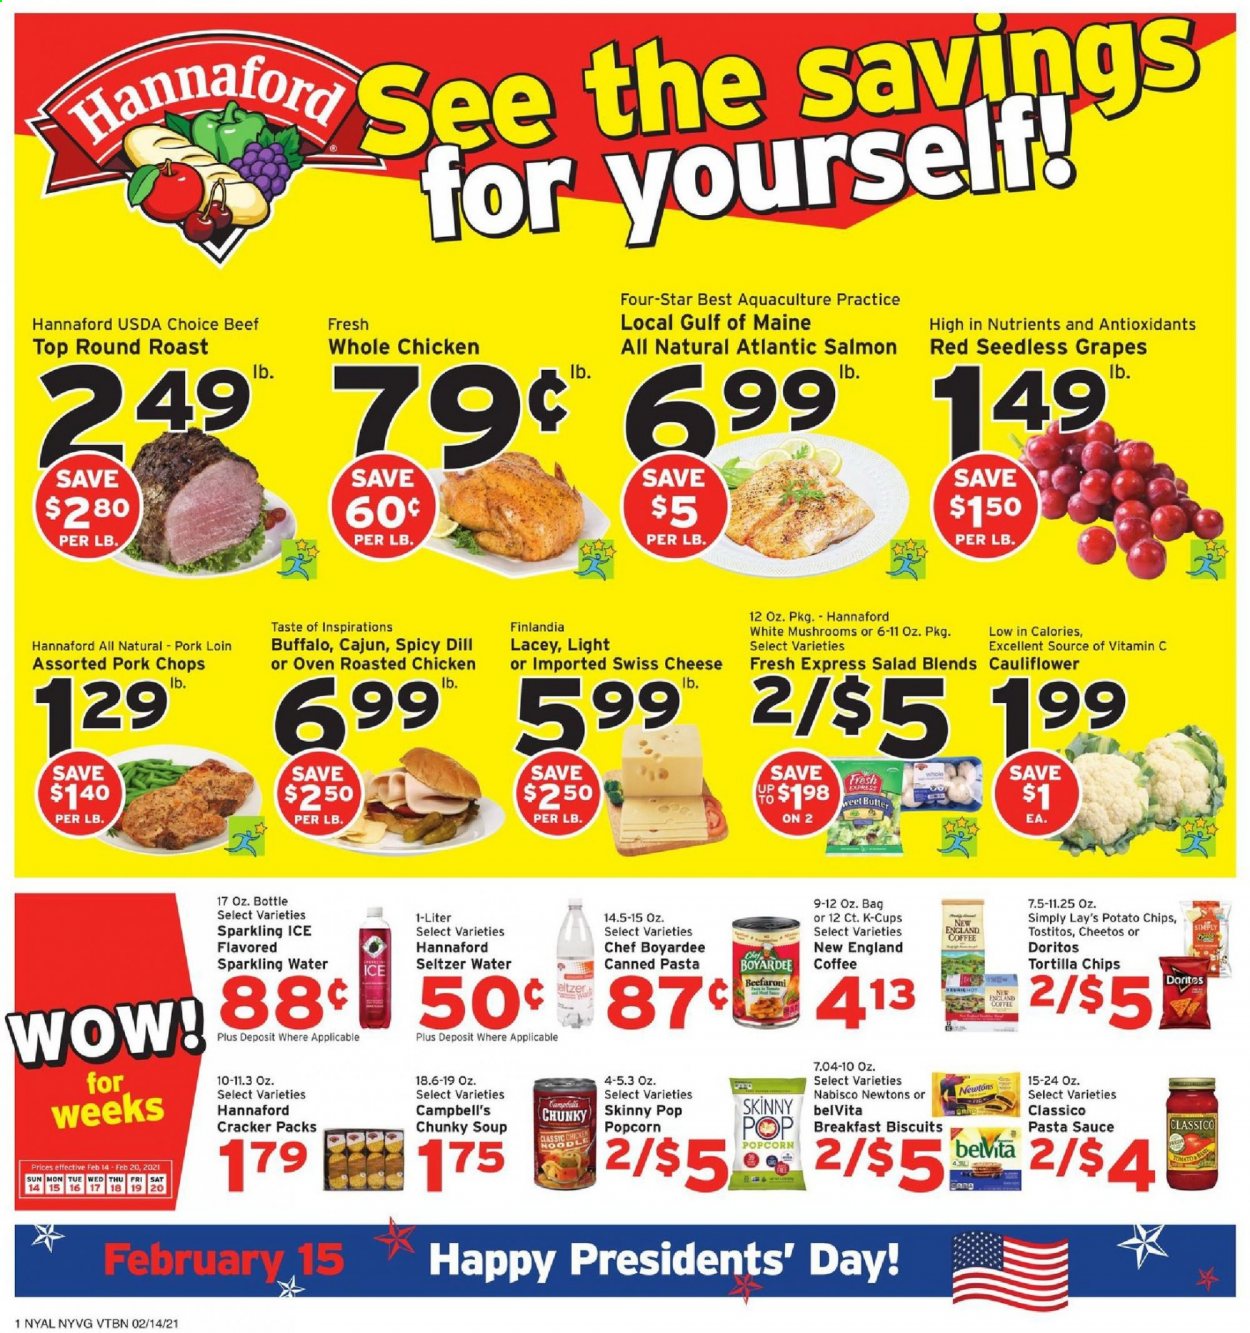 thumbnail - Hannaford Flyer - 02/14/2021 - 02/20/2021 - Sales products - mushrooms, seedless grapes, salmon, Campbell's, soup, salad, sauce, swiss cheese, cheese, butter, cauliflower, crackers, biscuit, Doritos, tortilla chips, potato chips, Cheetos, chips, Lay’s, popcorn, Tostitos, Skinny Pop, Chef Boyardee, belVita, dill, pasta sauce, seltzer water, sparkling water, coffee, coffee capsules, K-Cups, whole chicken, beef meat, round roast, pork chops, pork loin, pork meat, vitamin c. Page 1.